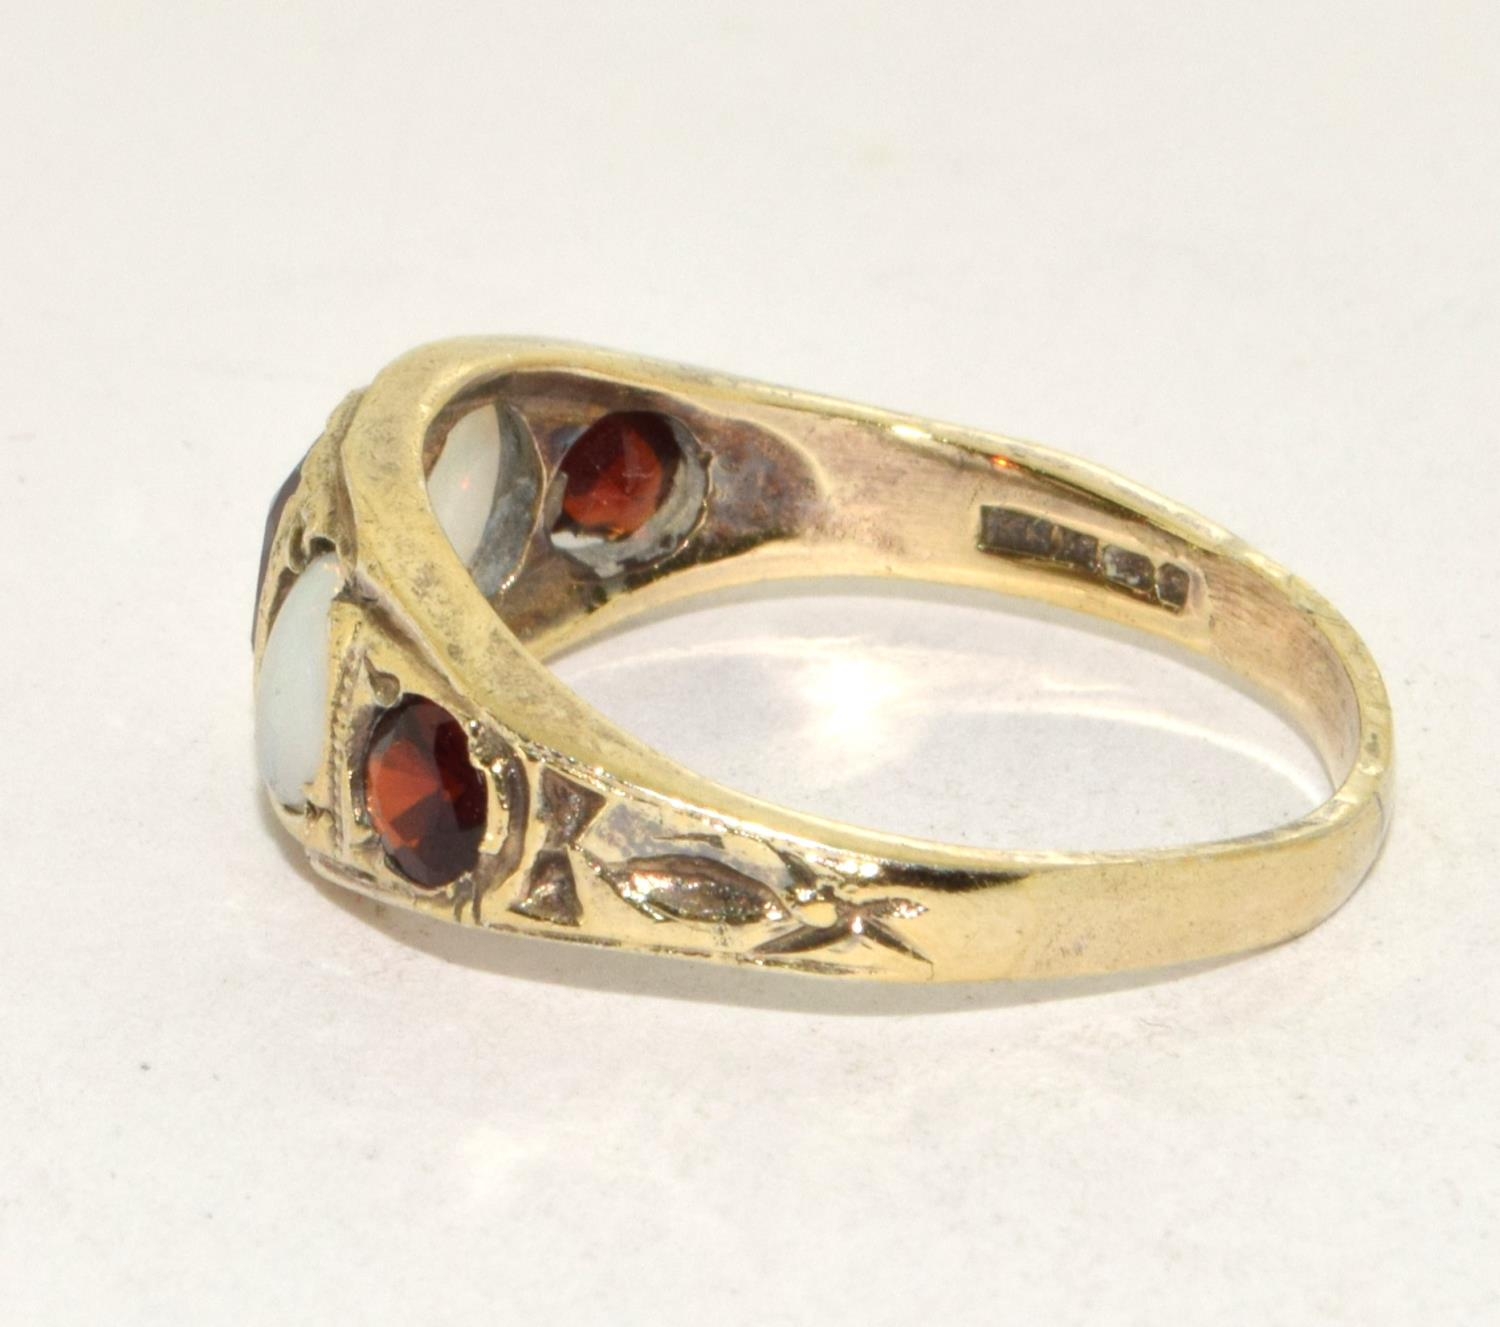 Vintage 9ct gold Opal and Garnet 5 stone ring size O - Image 2 of 5